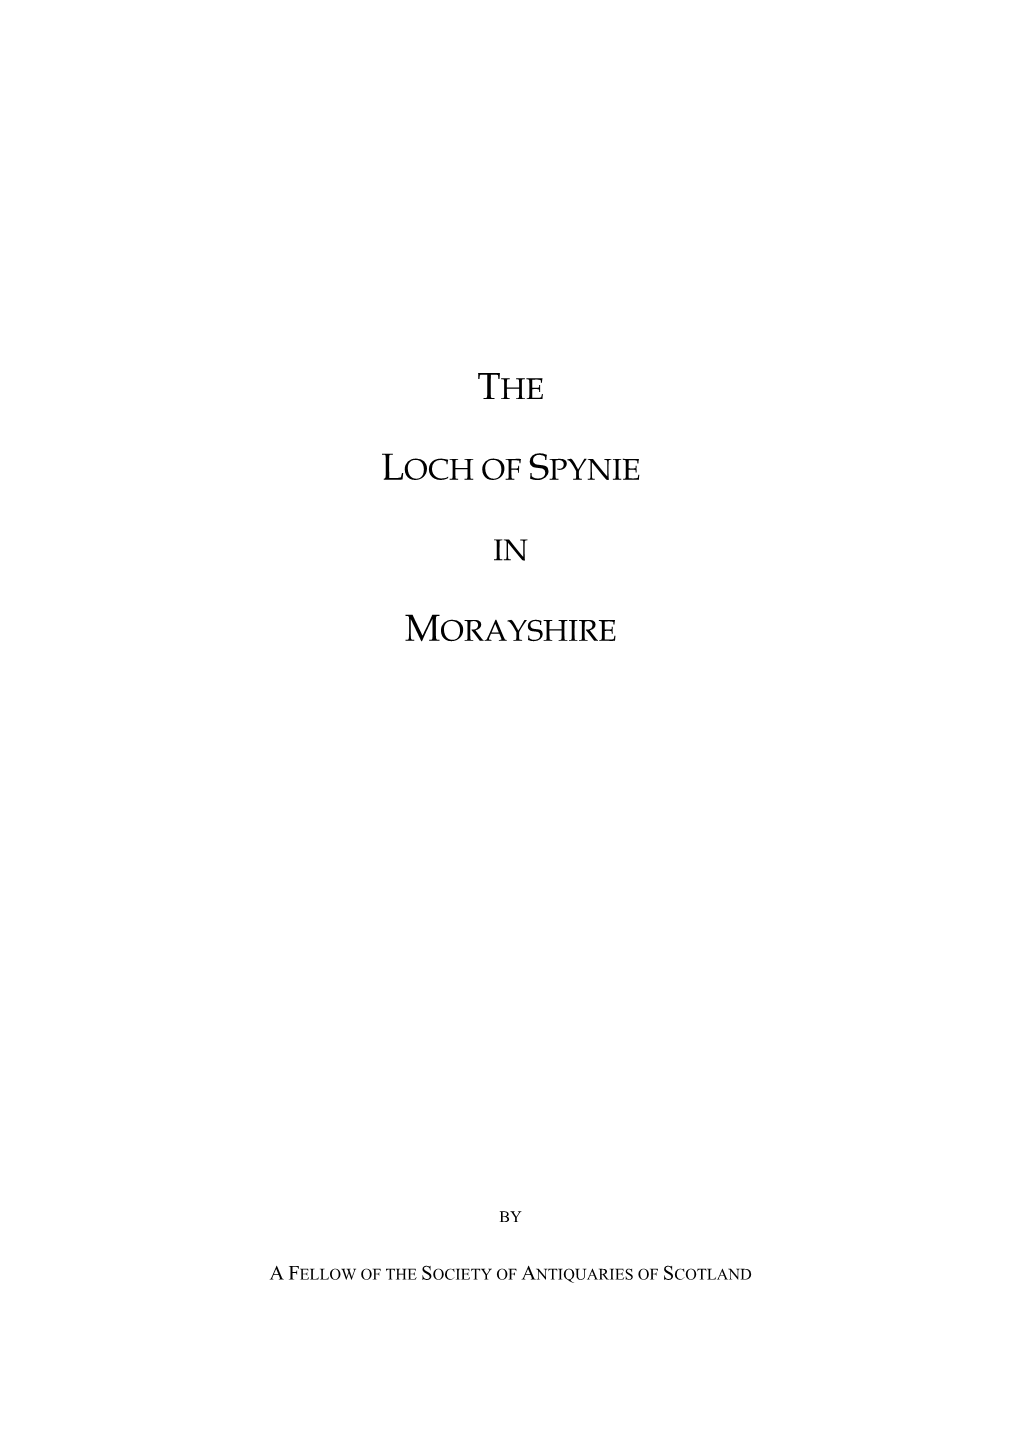 The Loch of Spynie: an Introduction